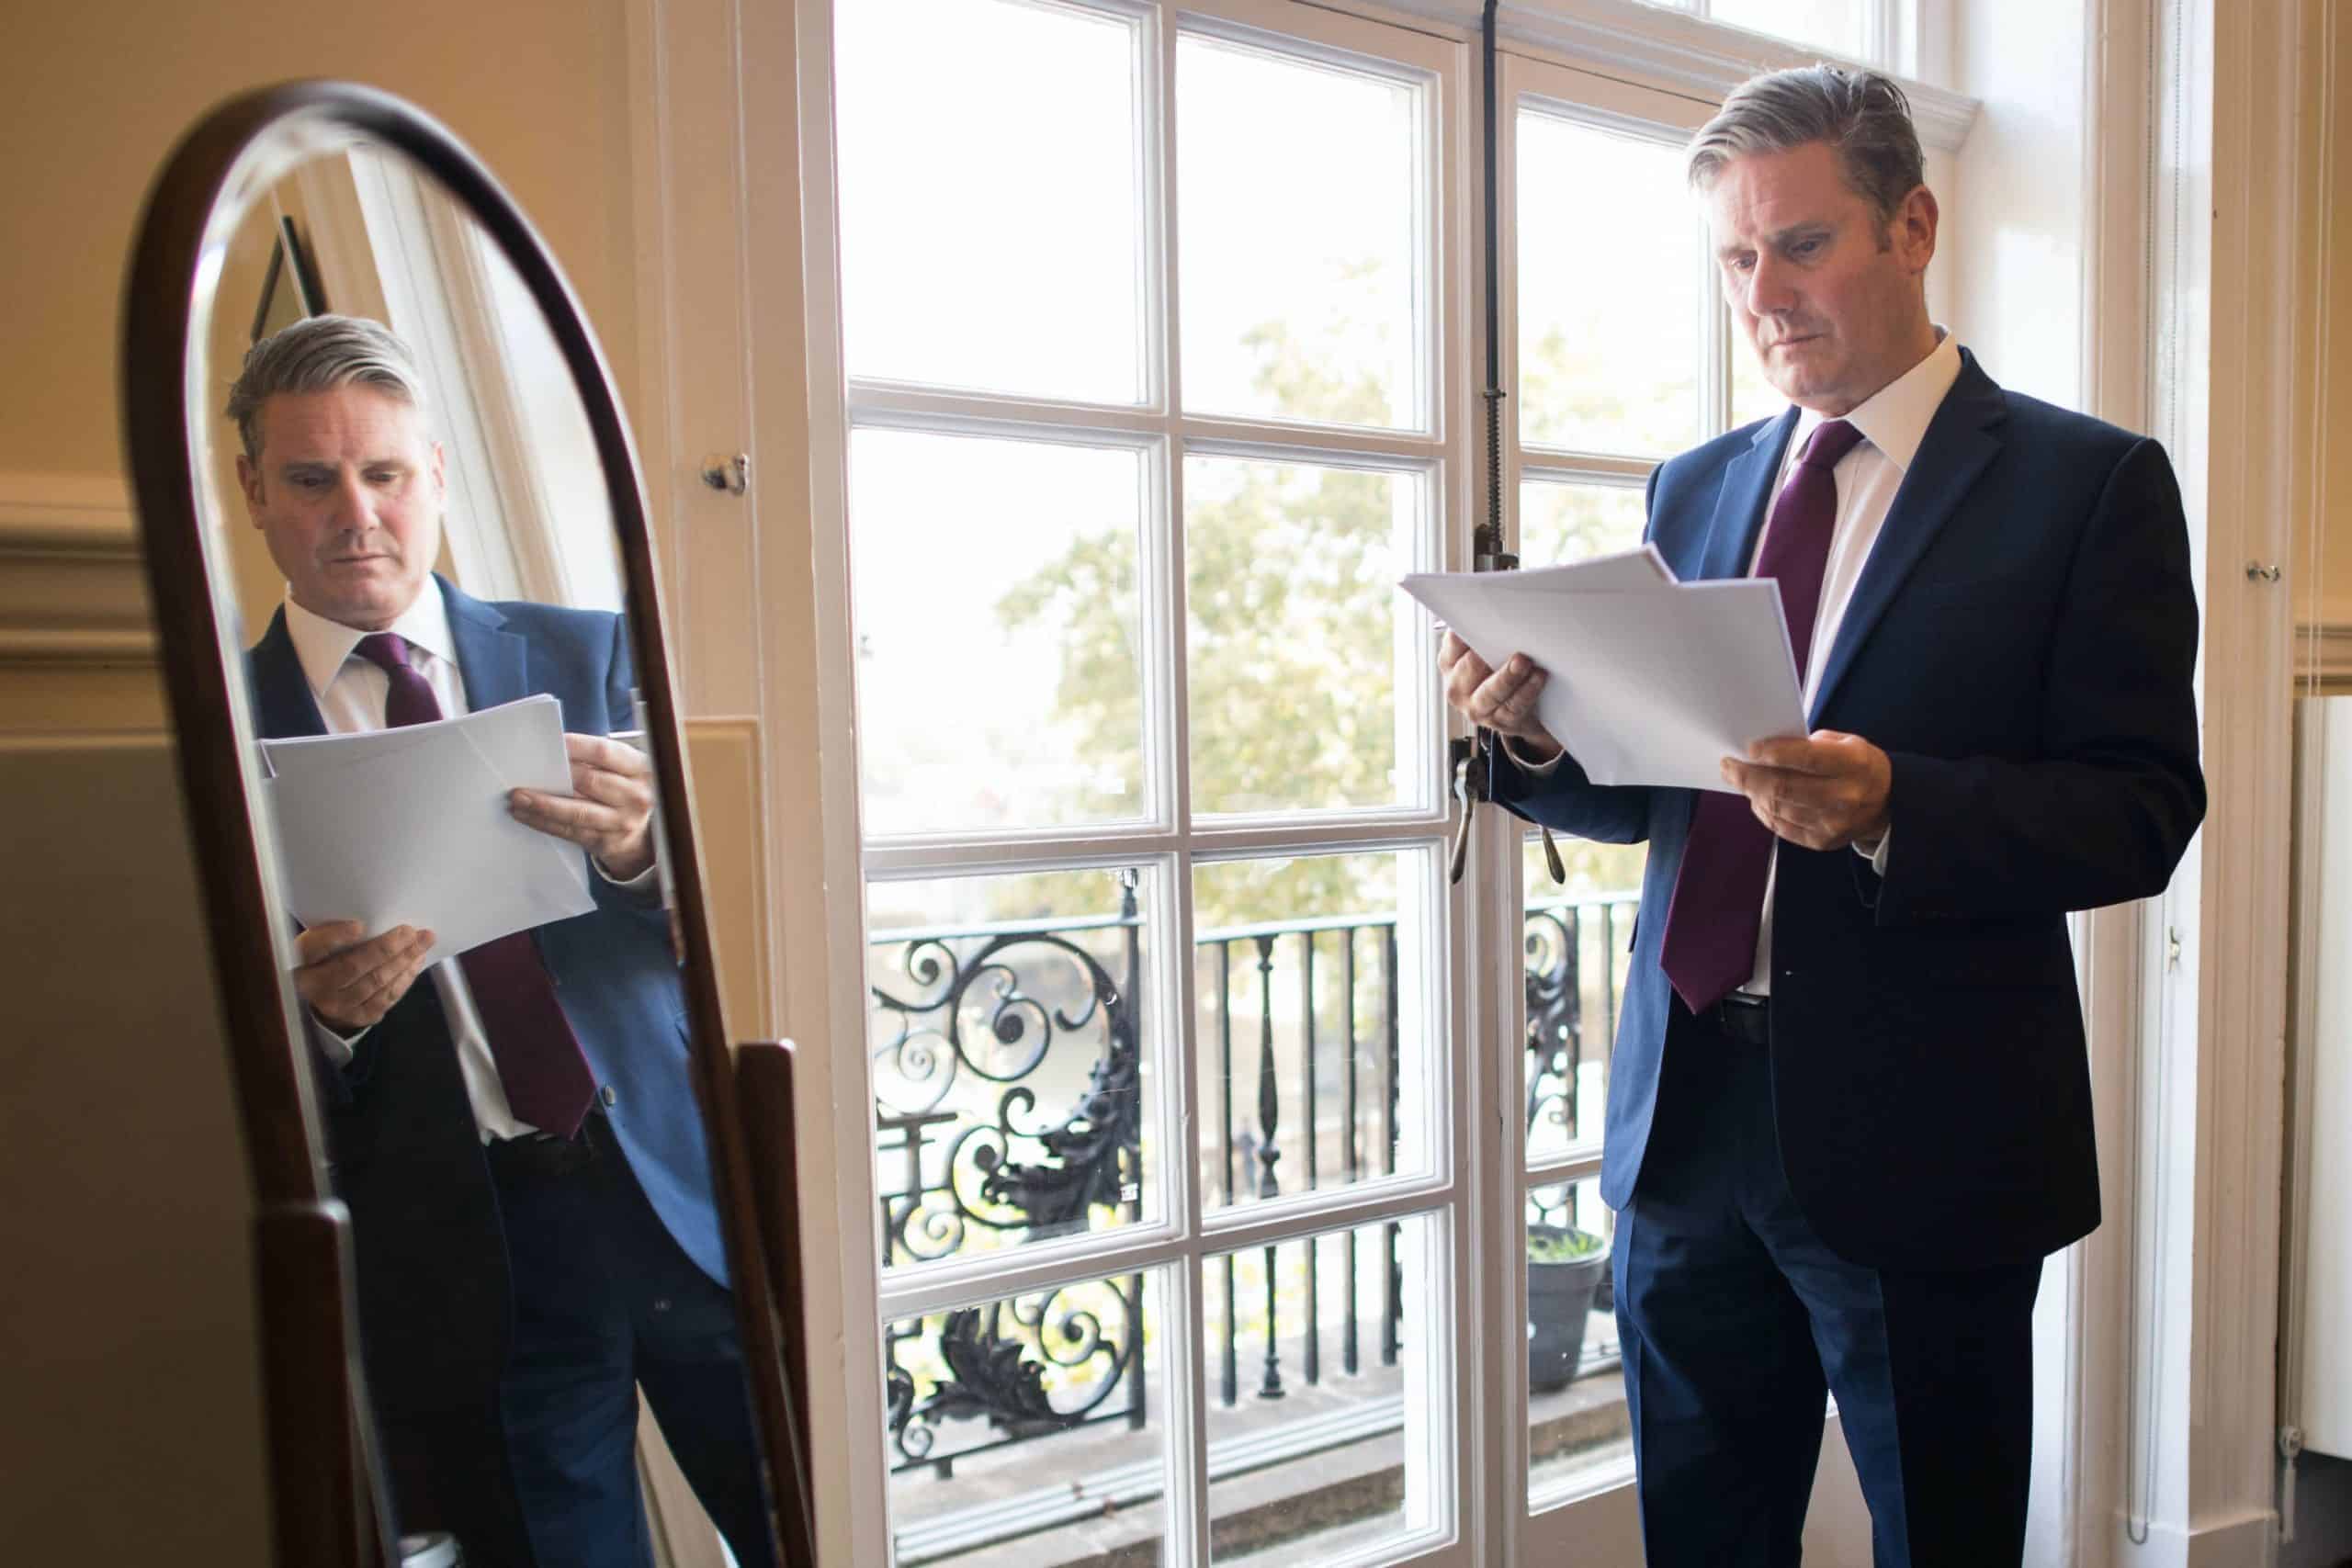 Covid offered Starmer the opportunity to reshape British politics – but instead he went on the retreat